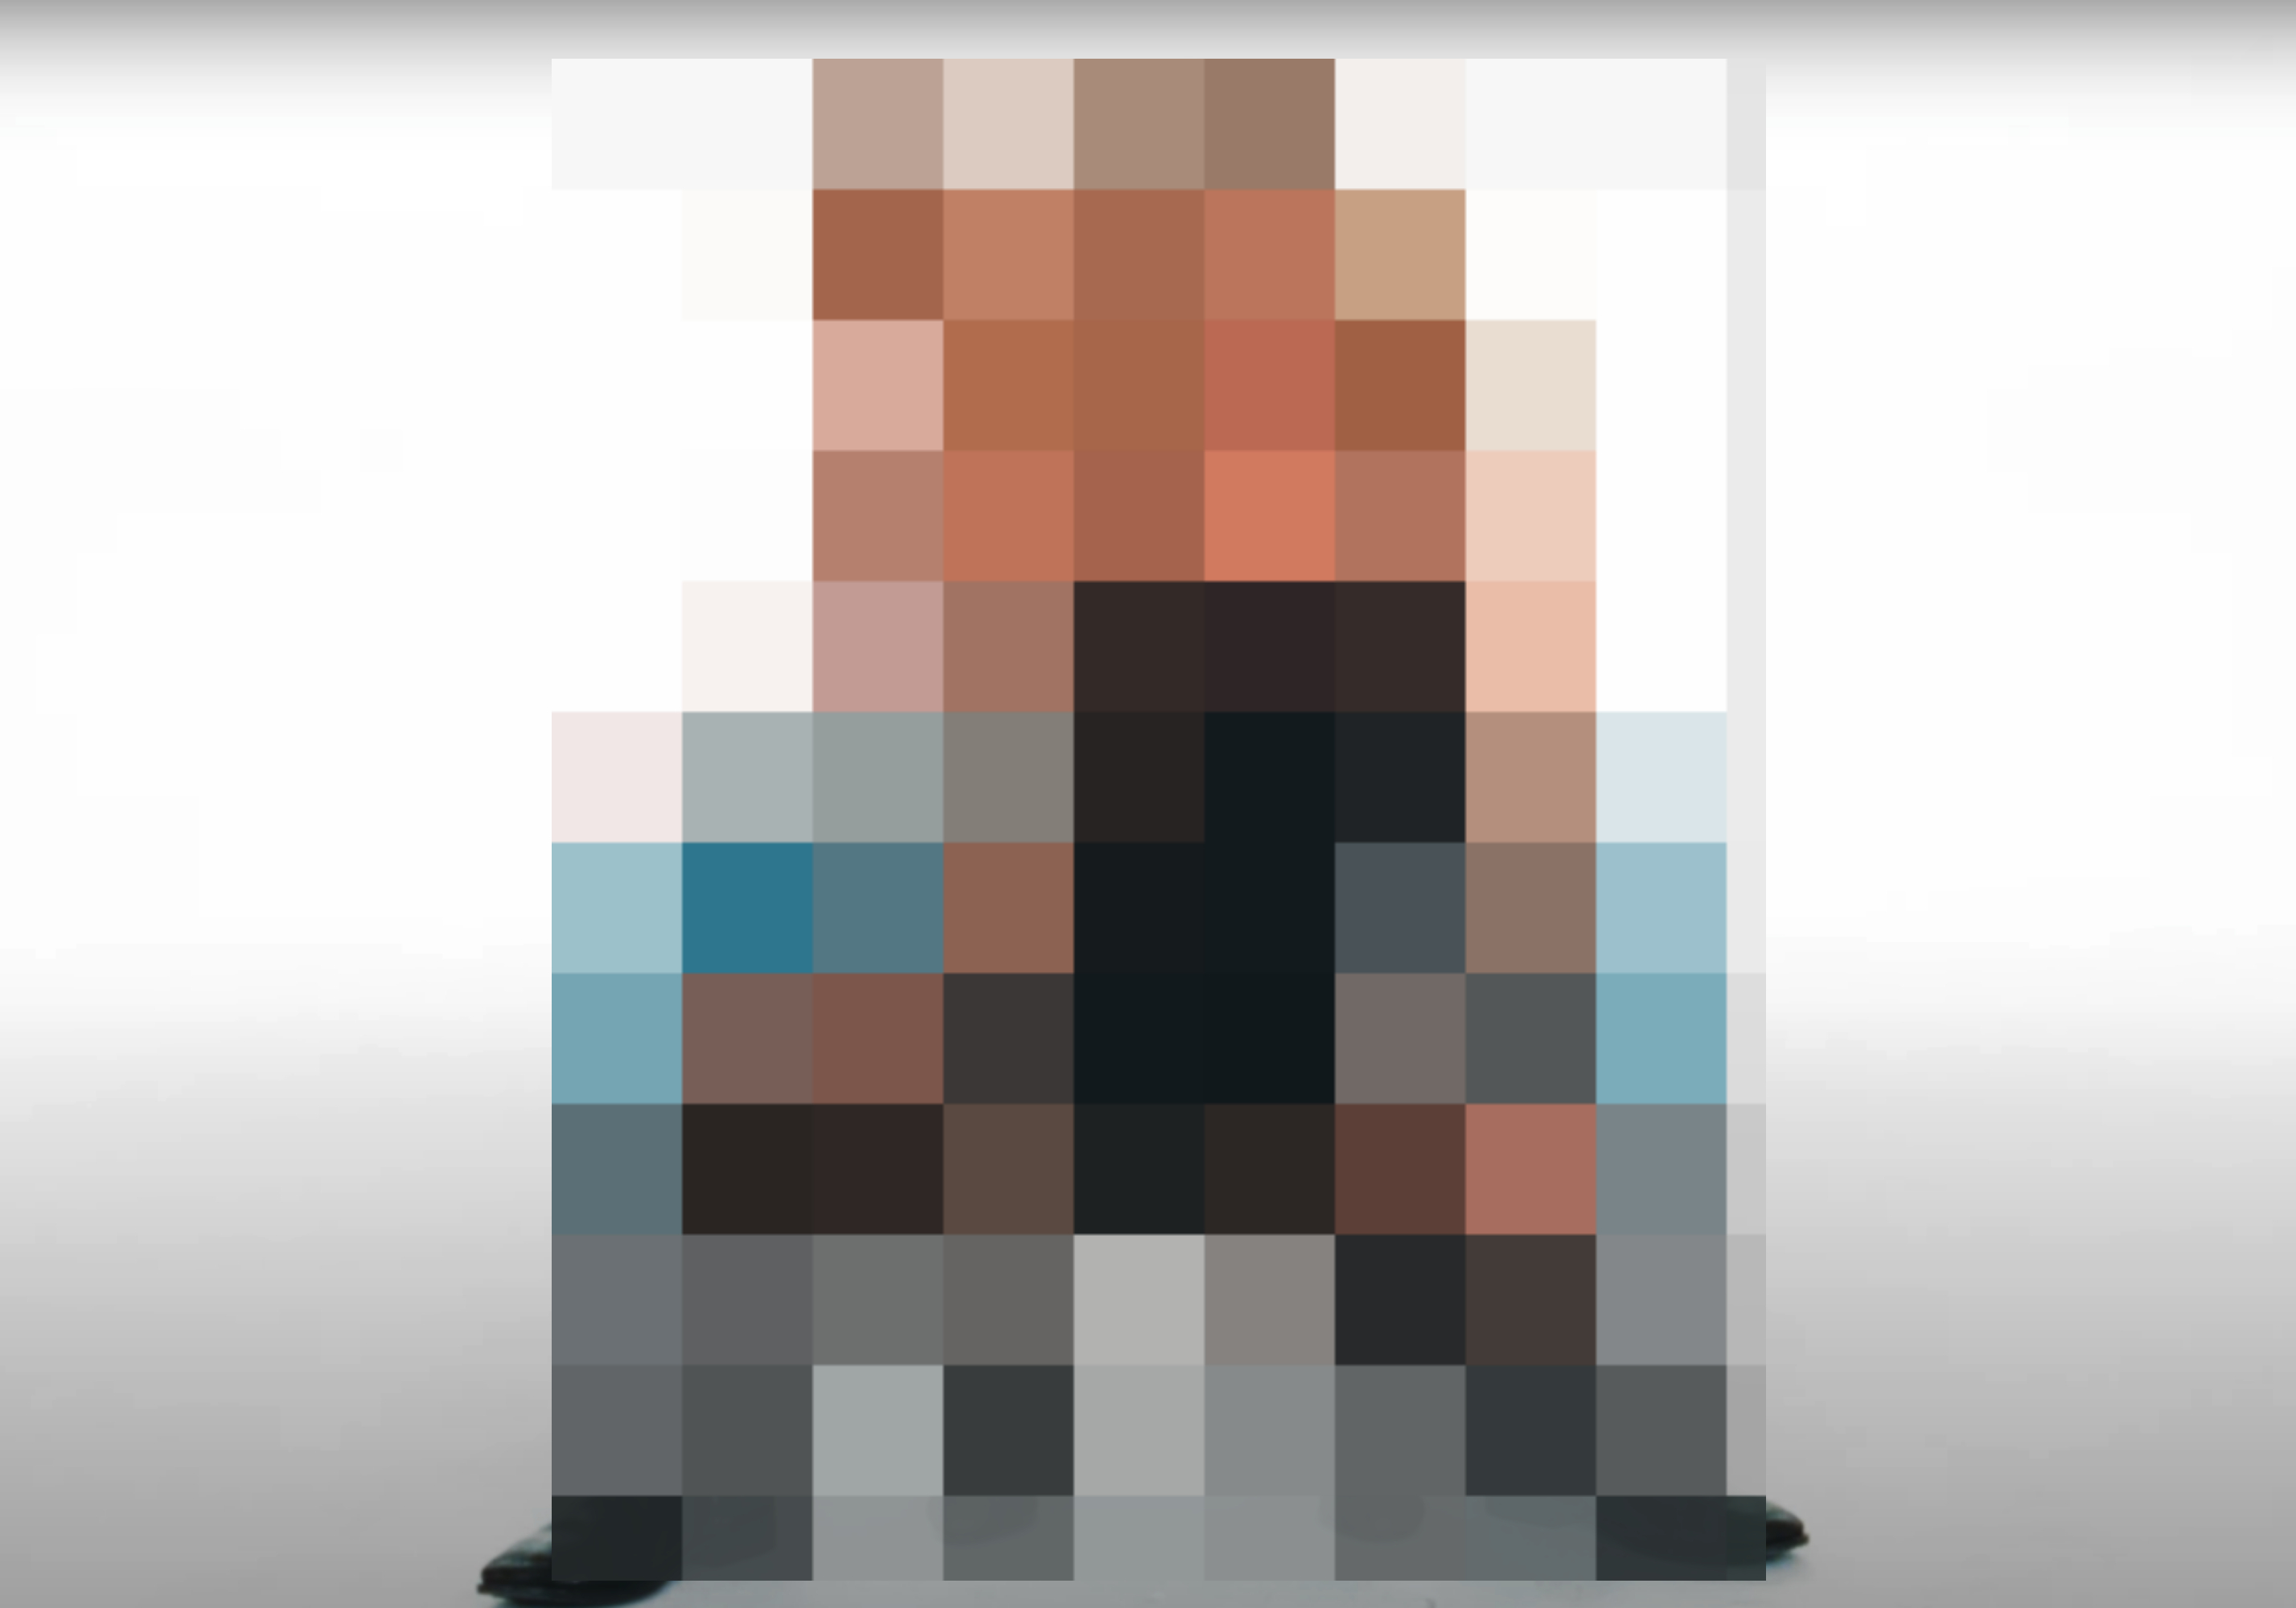 A pixelated image